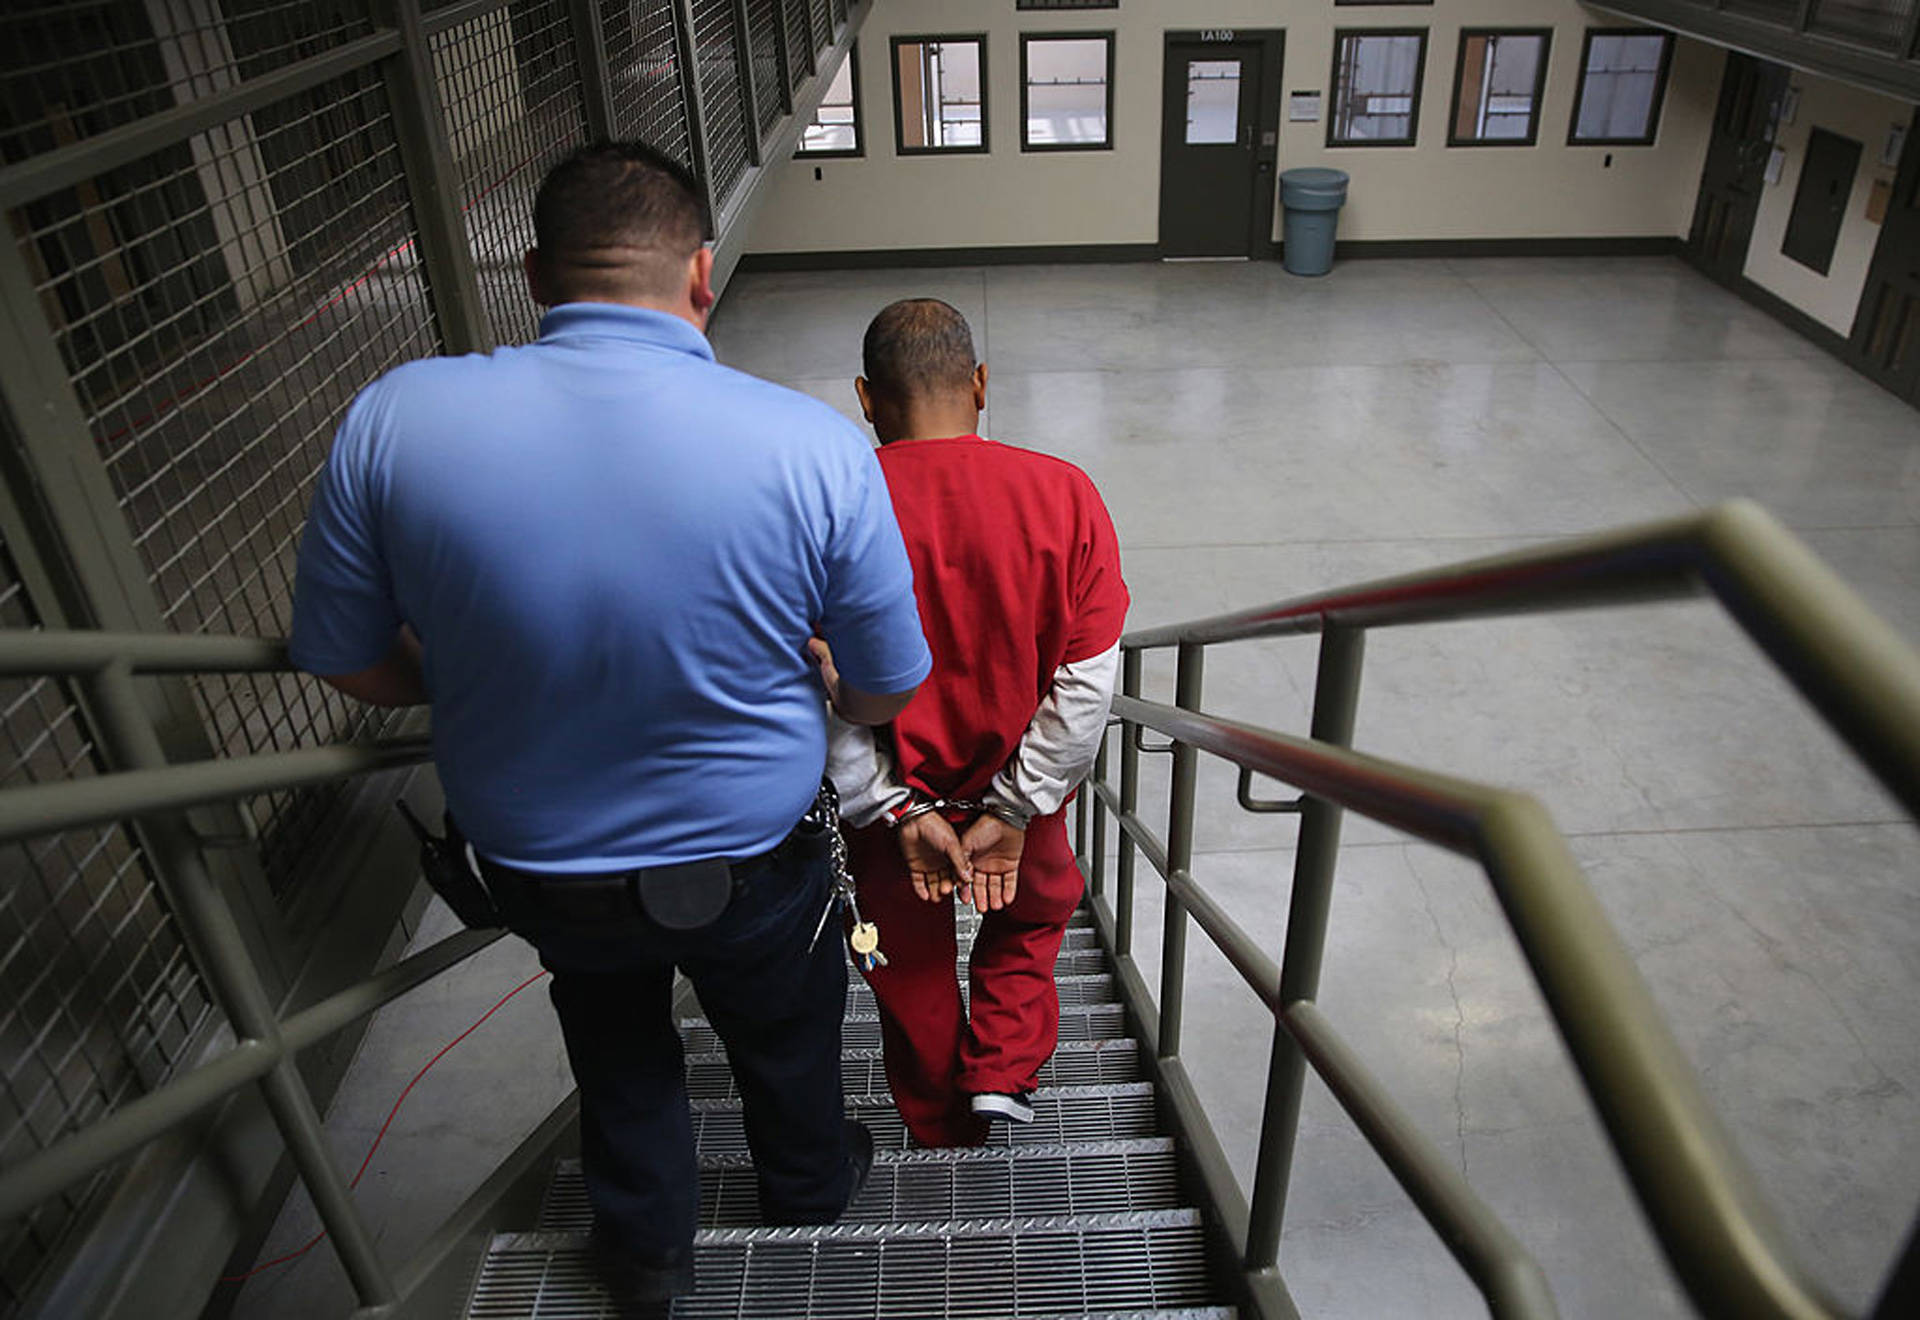 A guard escorts an immigrant detainee at the Adelanto Detention Facility, the largest Immigration and Customs Enforcement detention center in California. John Moore/Getty Images